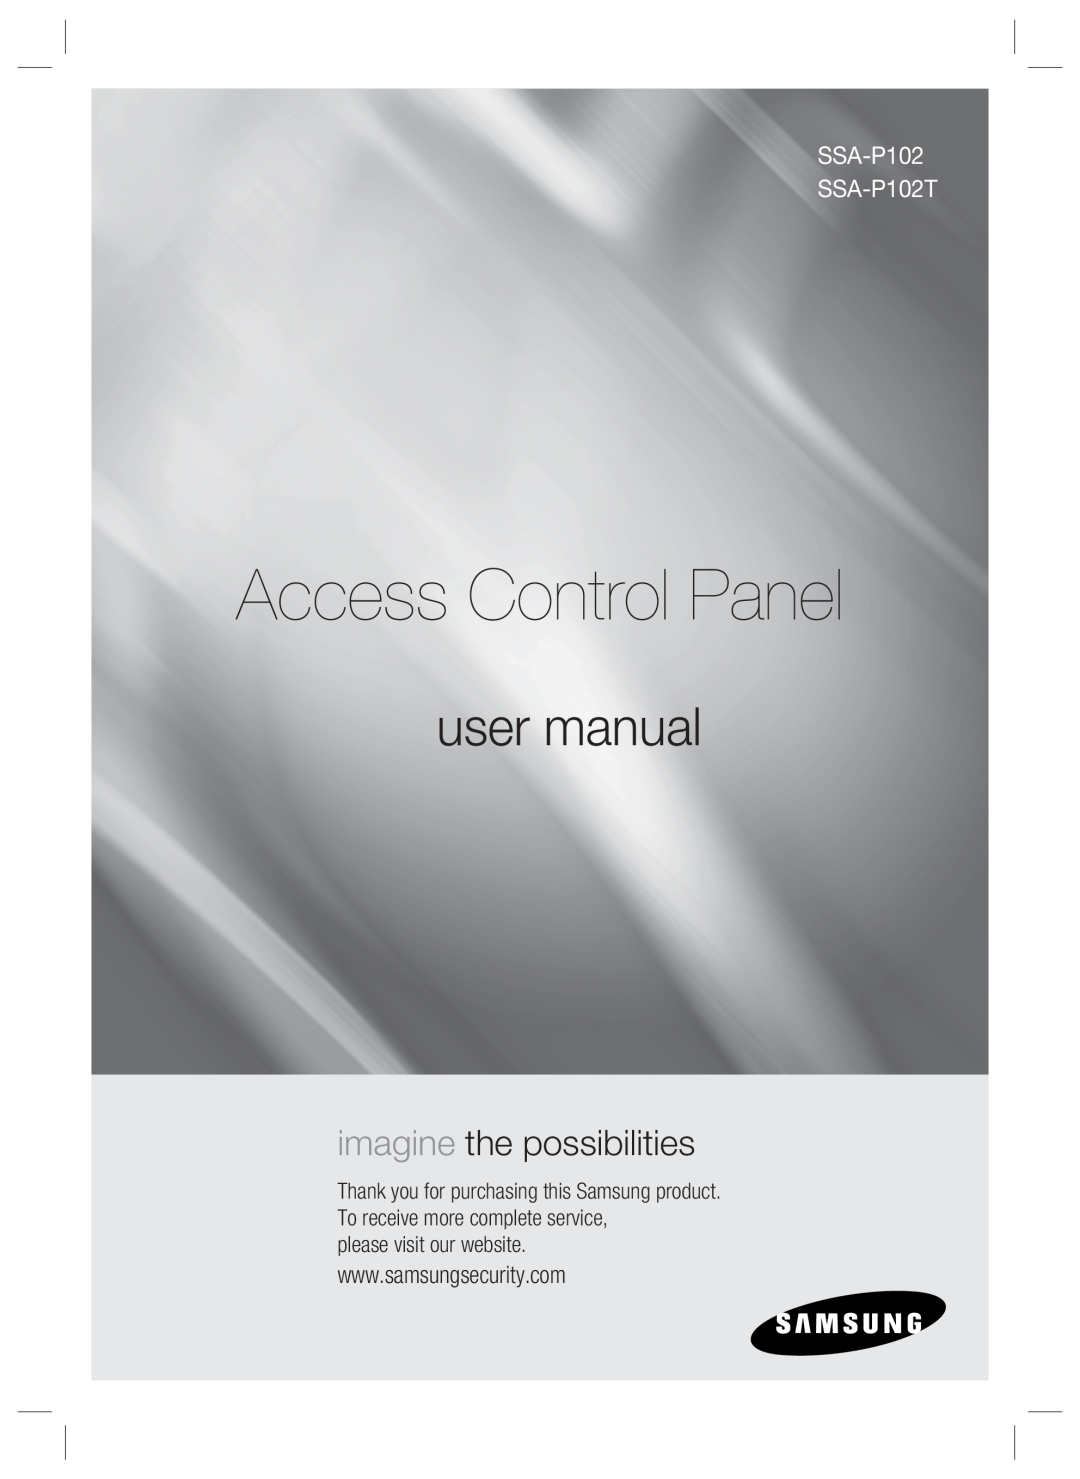 Samsung SSA-P102T user manual please visit our website, Access Control Panel, imagine the possibilities 